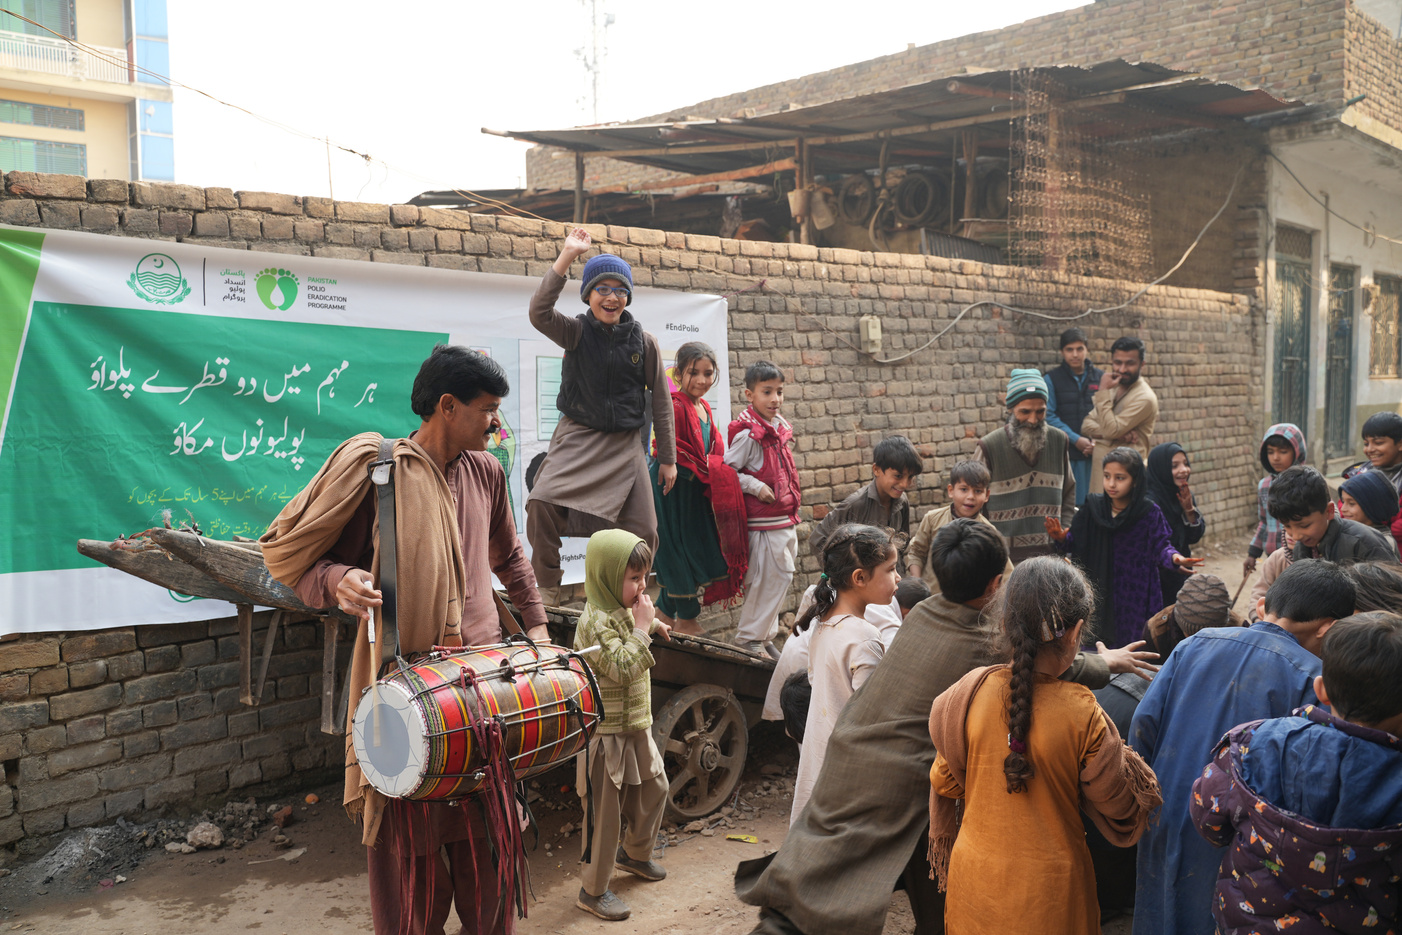 a group of people gathered around a person playing a drum in Pakistani street